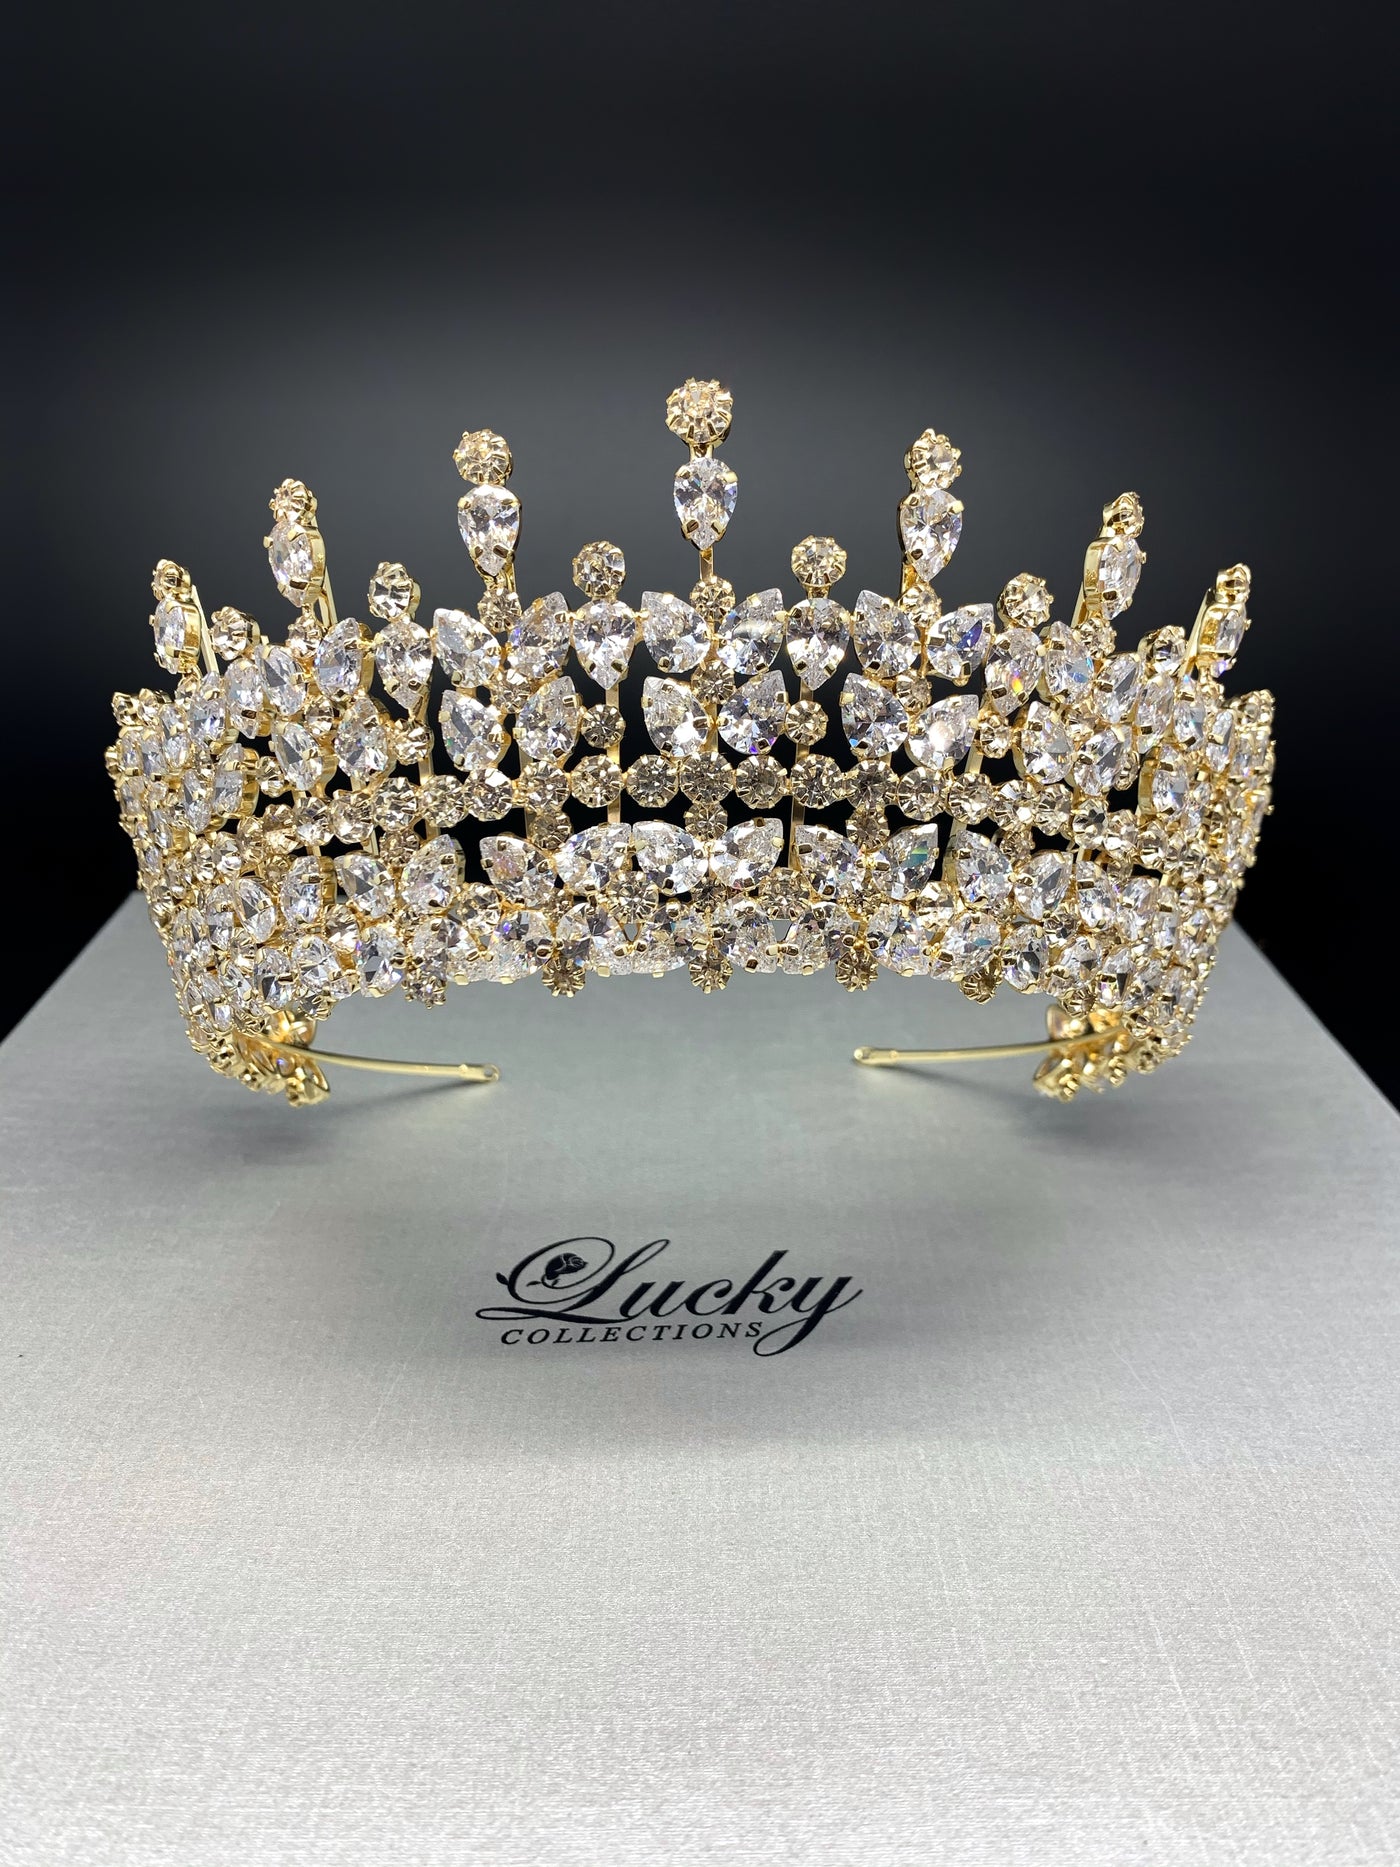 Gold Tiara, Cubic Zirconia, AAA CZ  adorn this Royal Tiara. Made with Marquise Zirconia and handset  with perfection. Lucky Collections ™